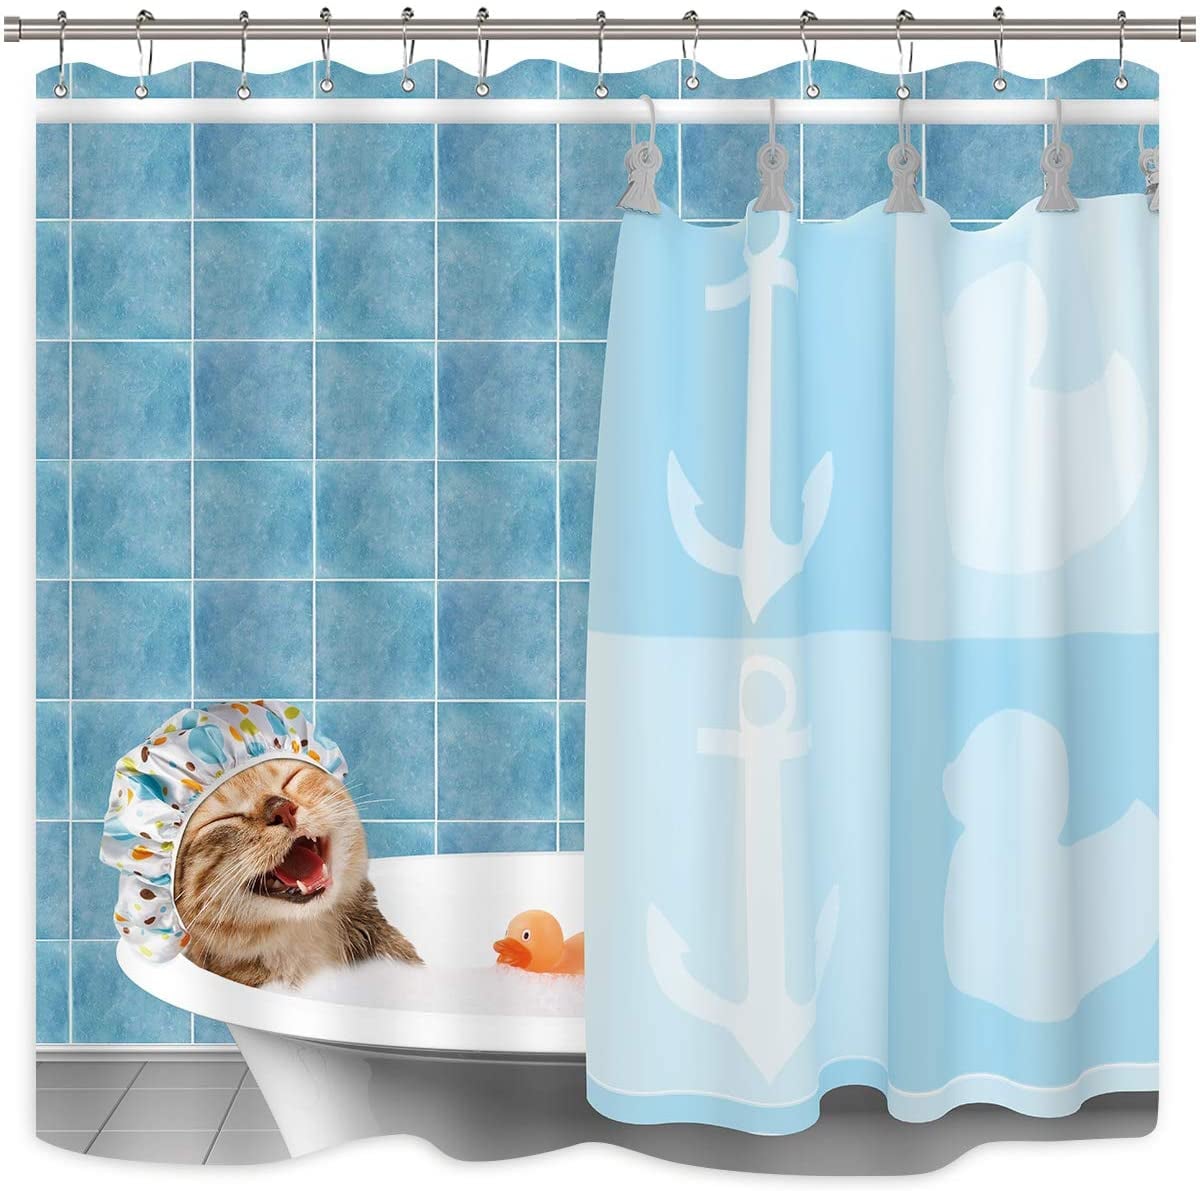 Funny And Weird Shower Curtains On Amazon Popsugar Home 4429 x 4074 jpeg 451 kb. funny and weird shower curtains on